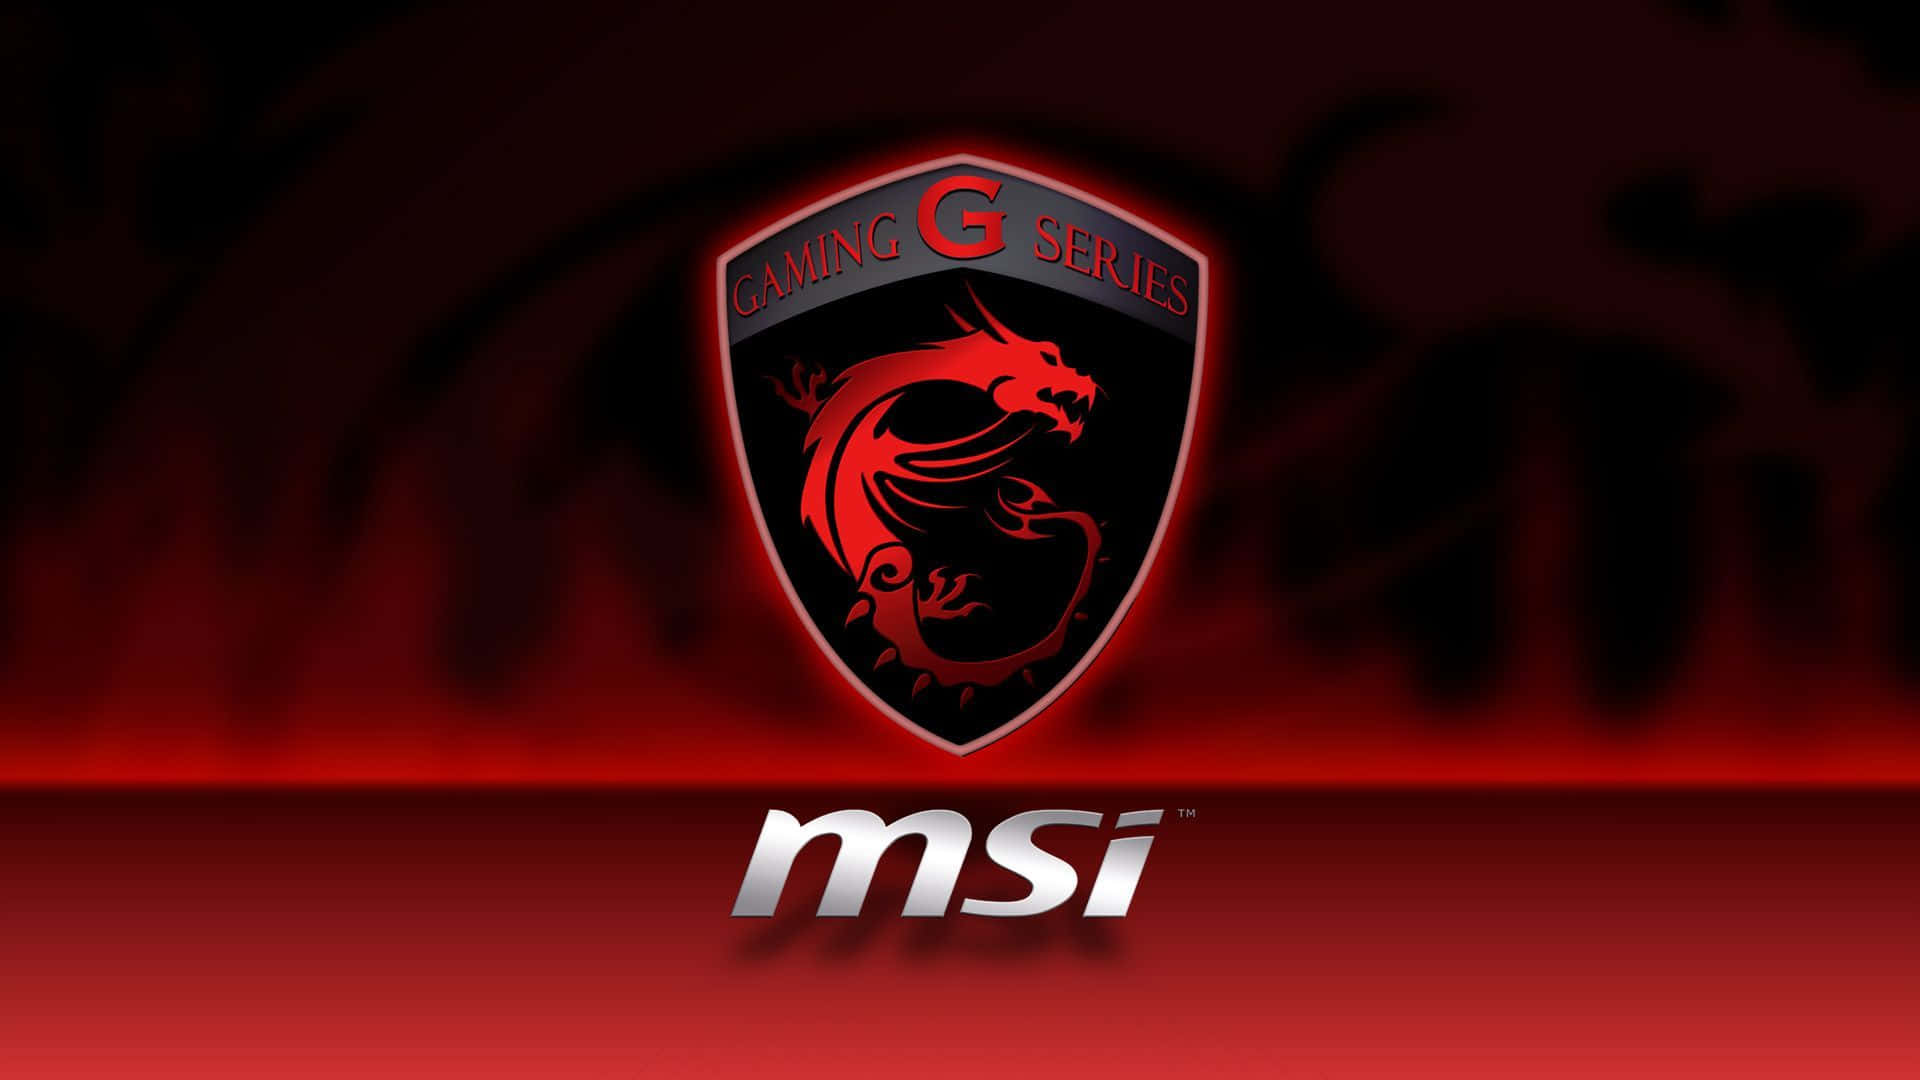 "Discover the power of MSI's newest gaming laptop".